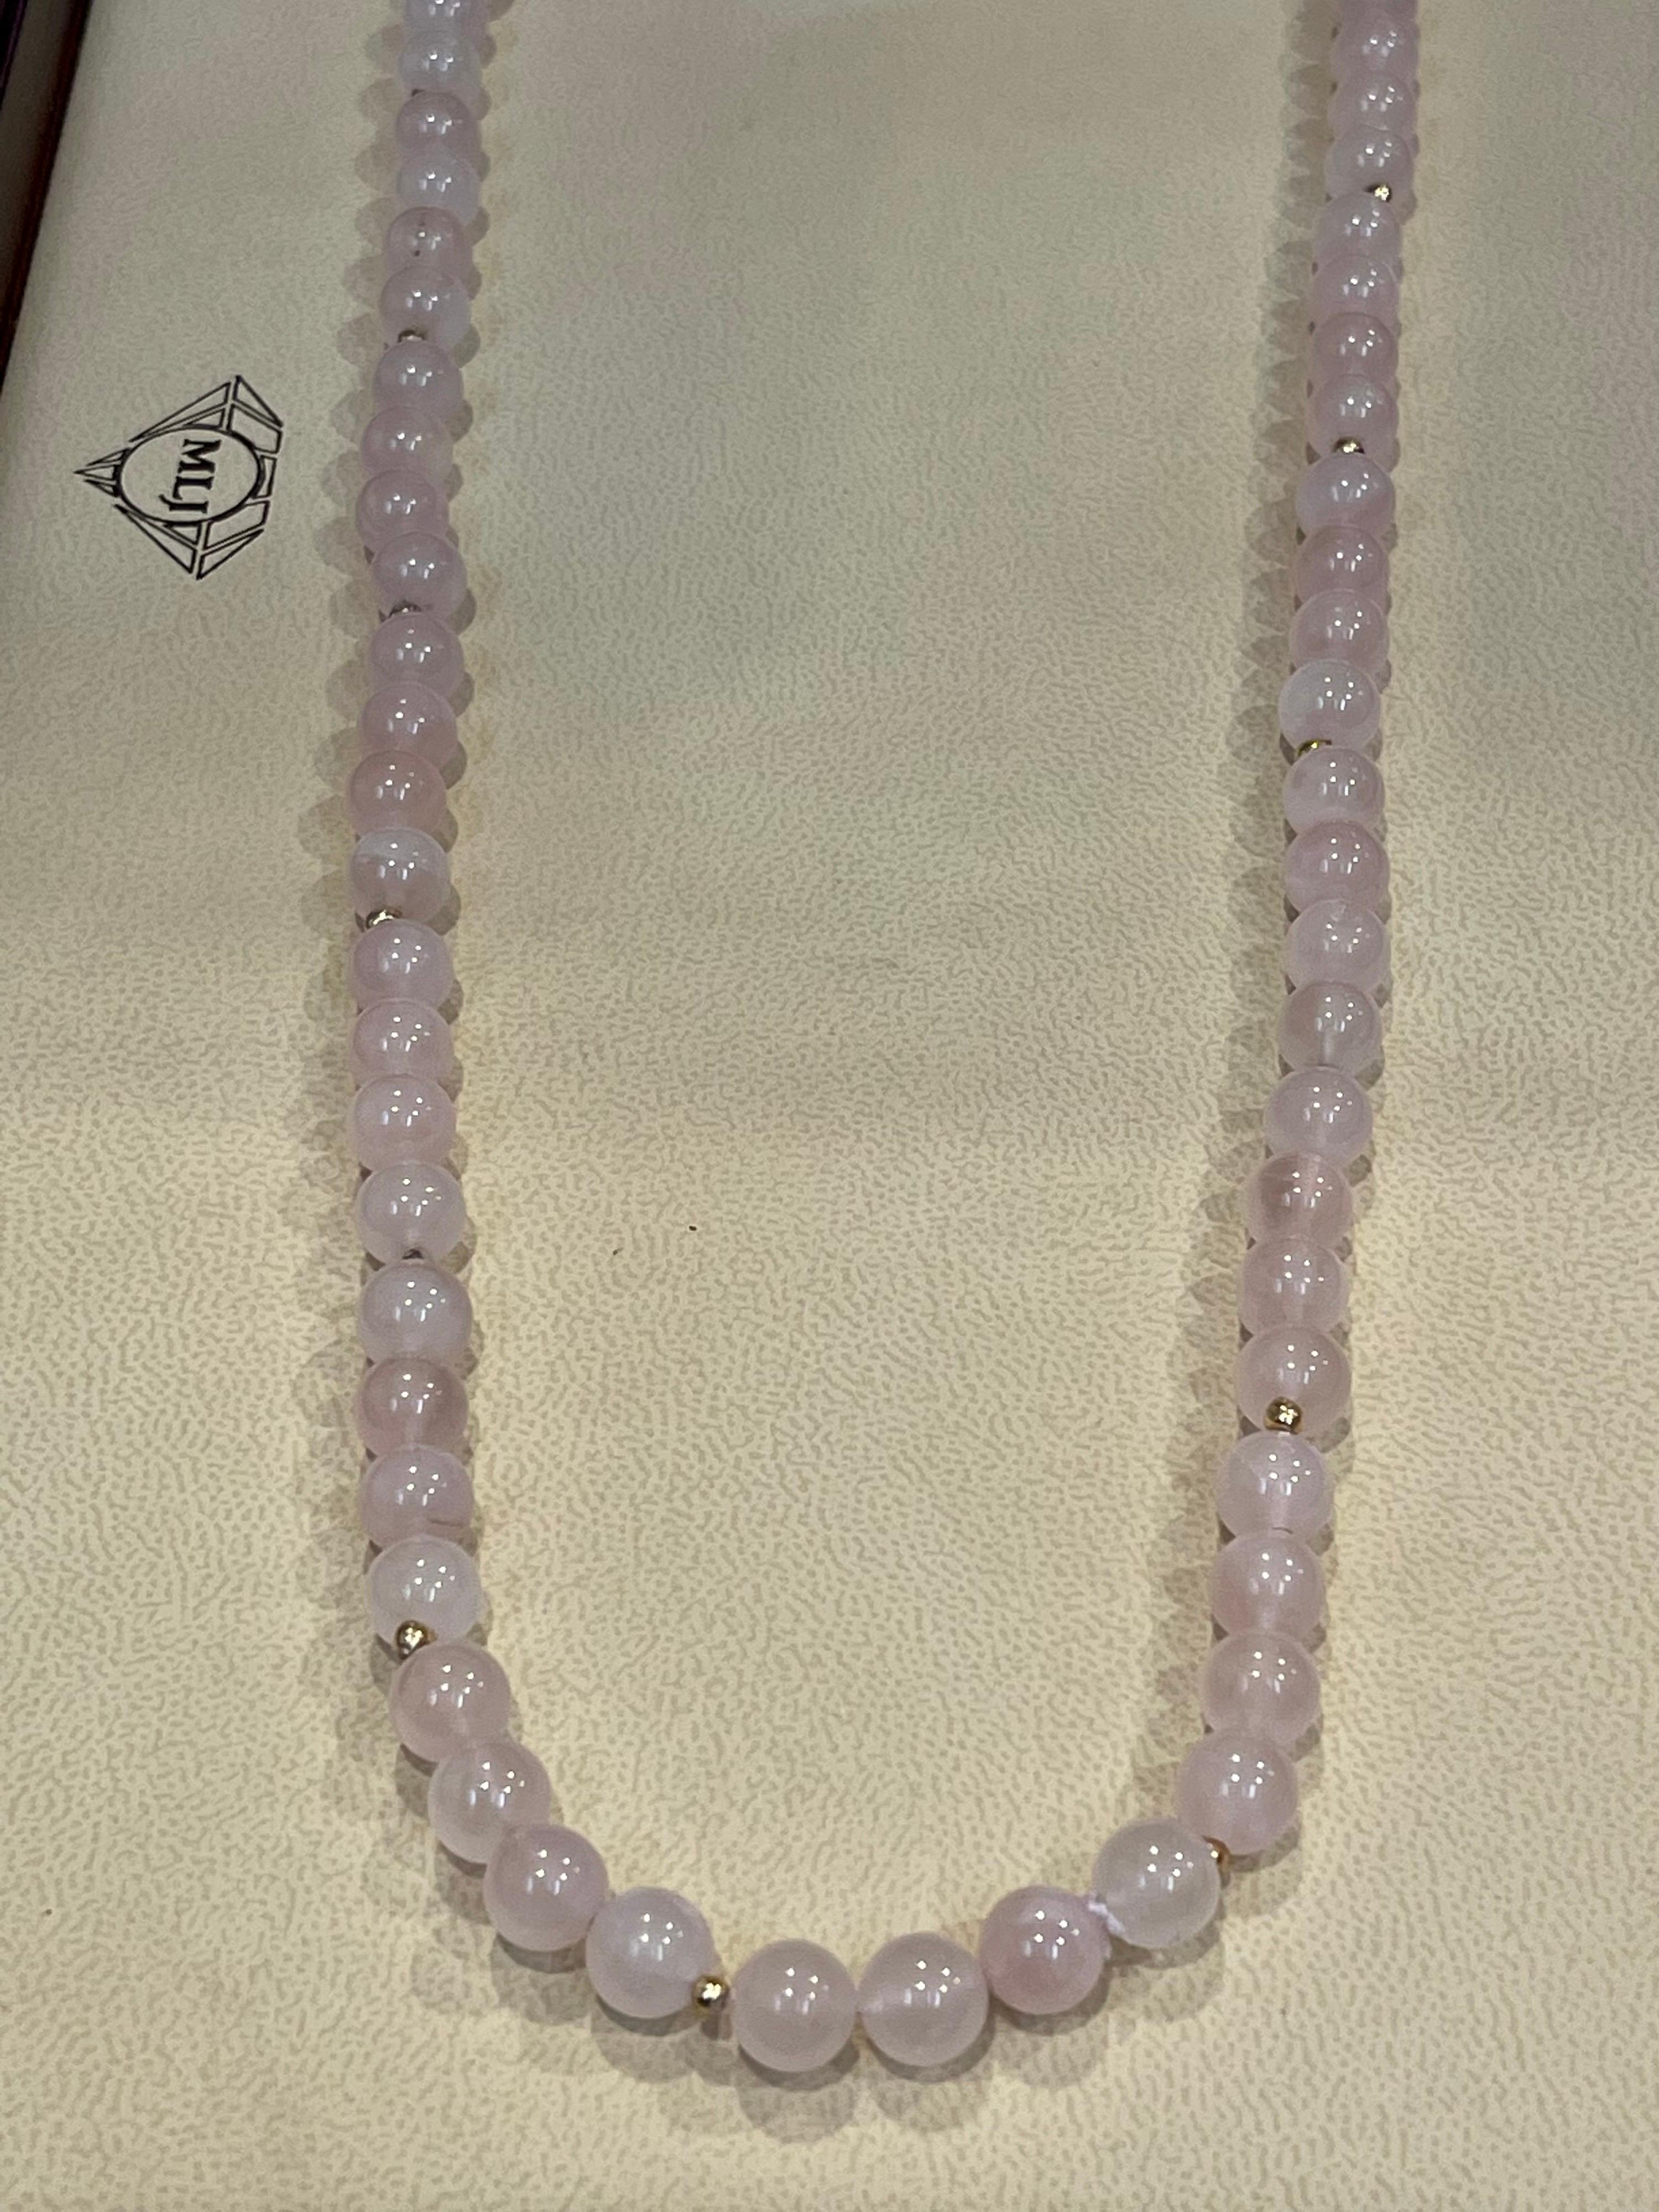 Round Cut Grade A+ Rose Quartz Crystal Bead Necklace 8.5 mm, With 14 K Gold Beads, Genuine For Sale